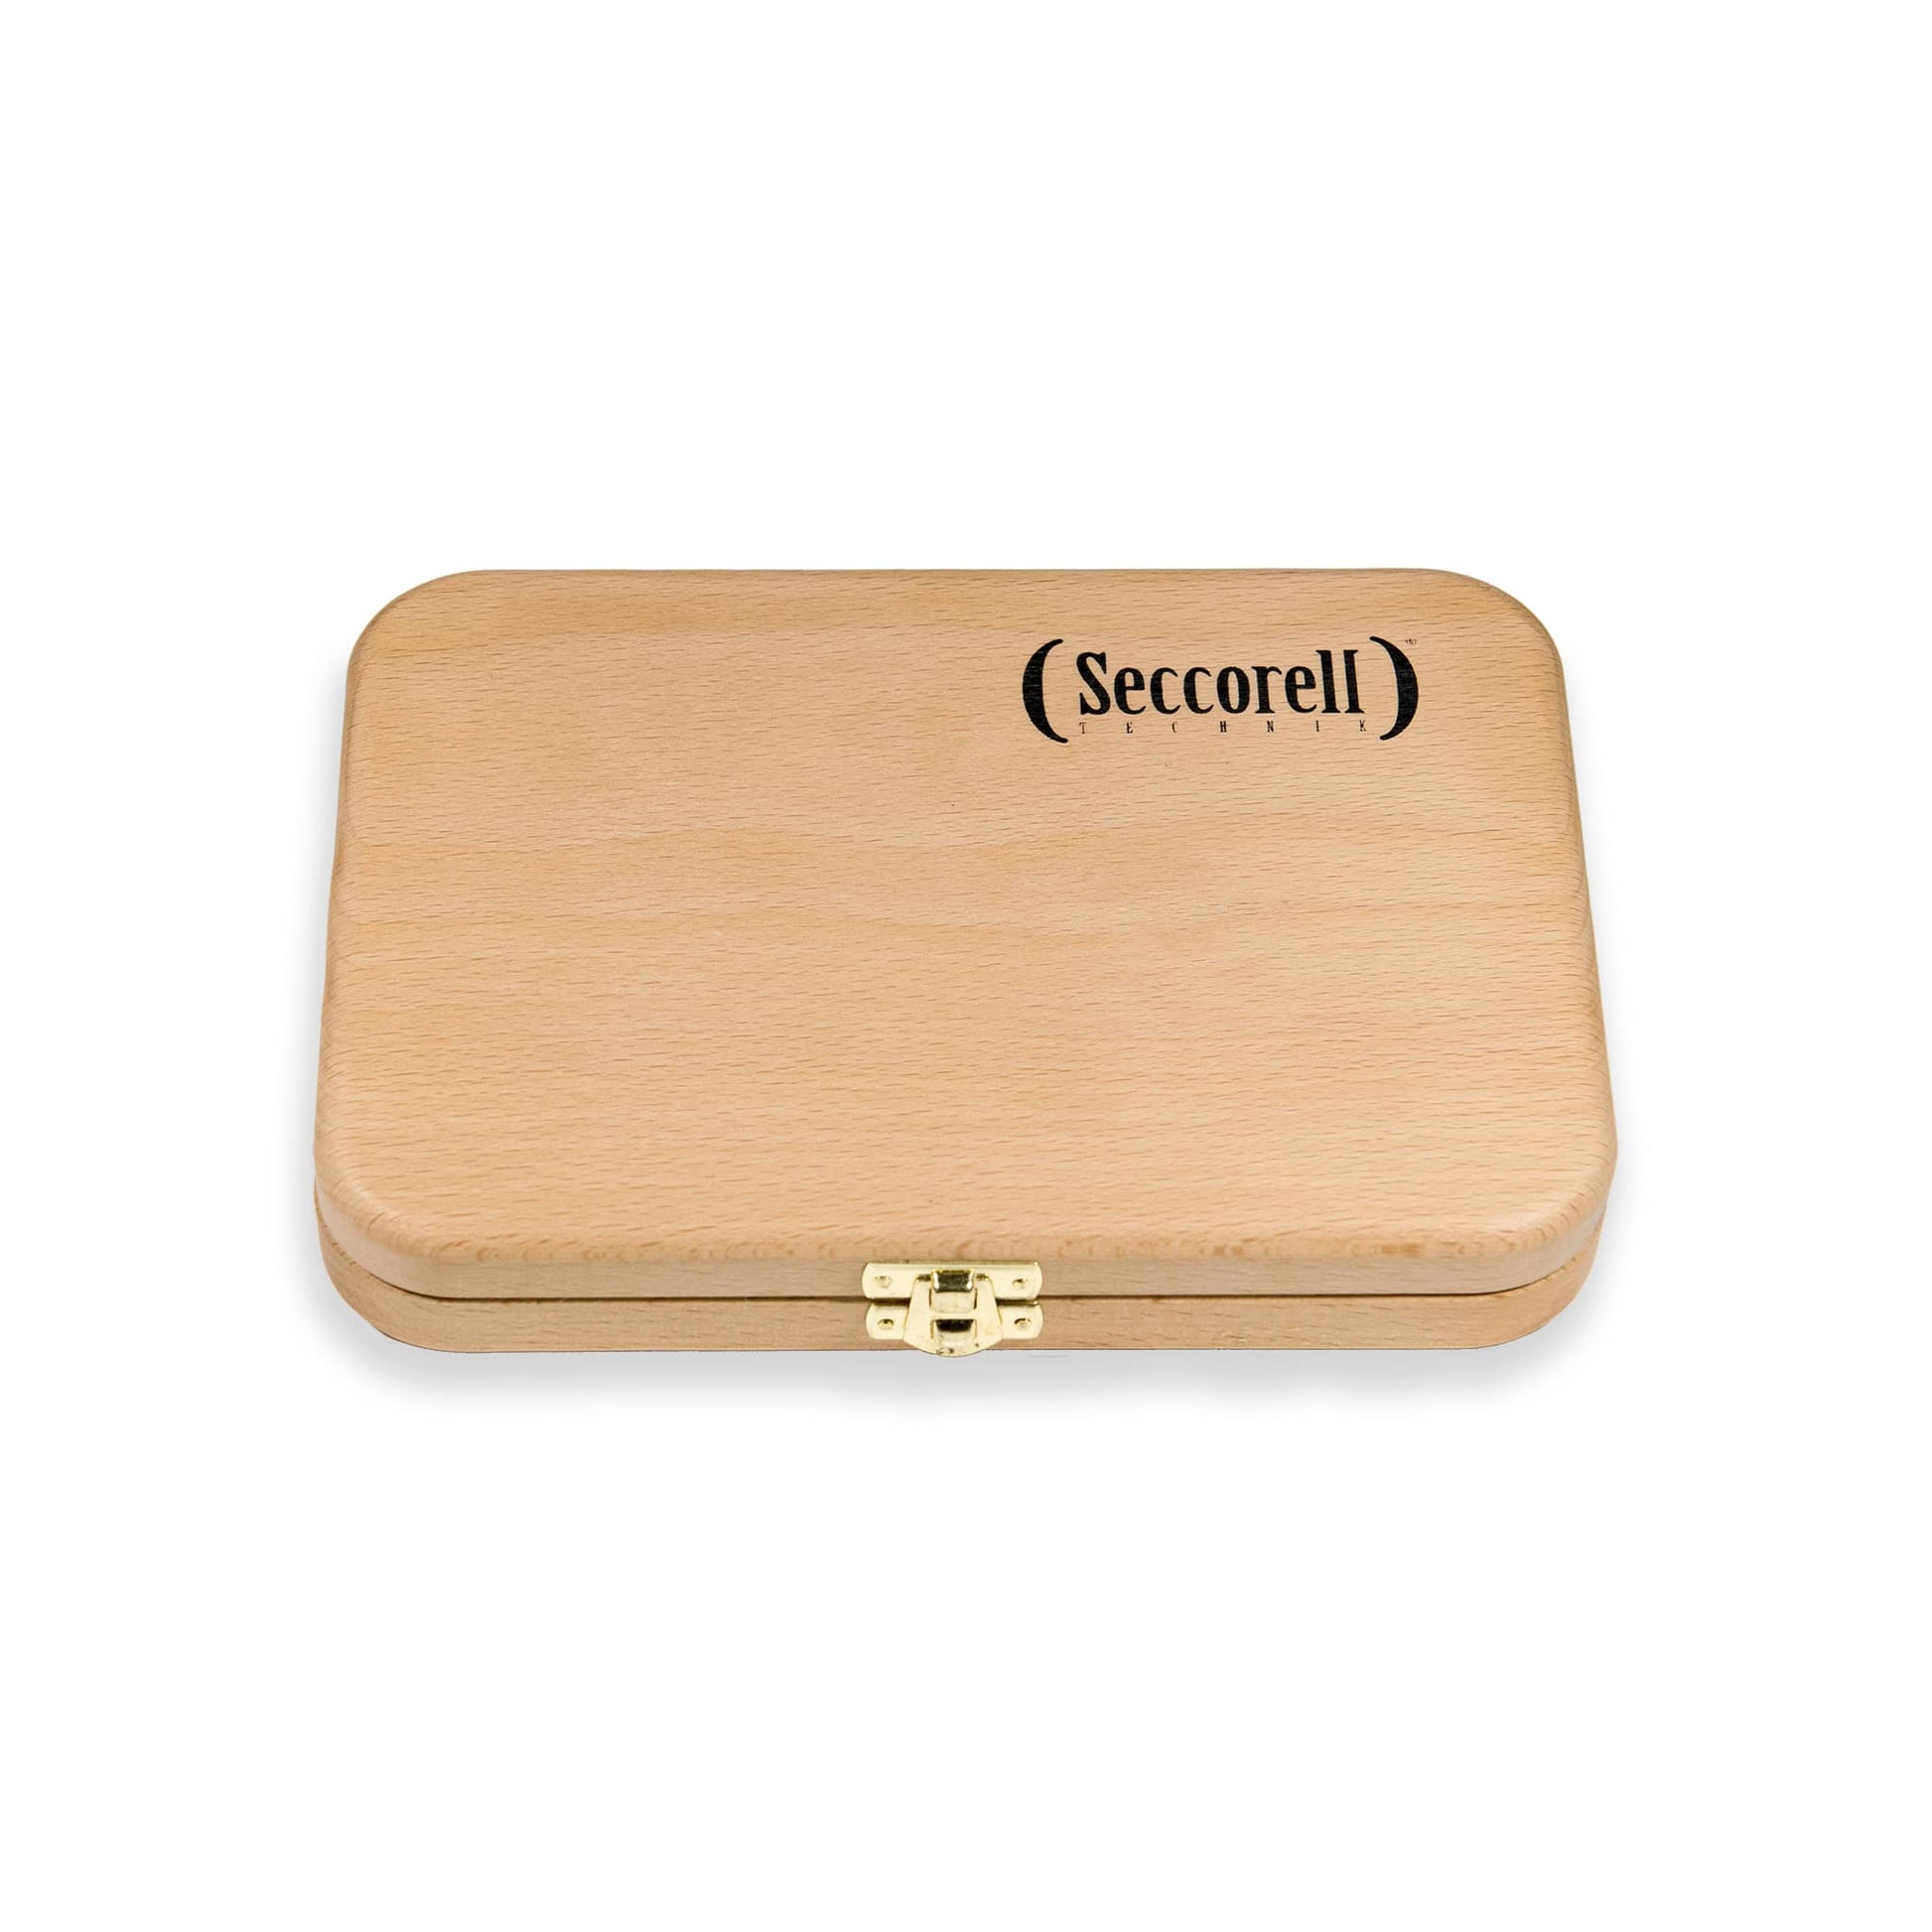 Seccorell Classic wood, simple and elegant, offers environmentally friendly packaging for the 8 Seccorell basic colors.